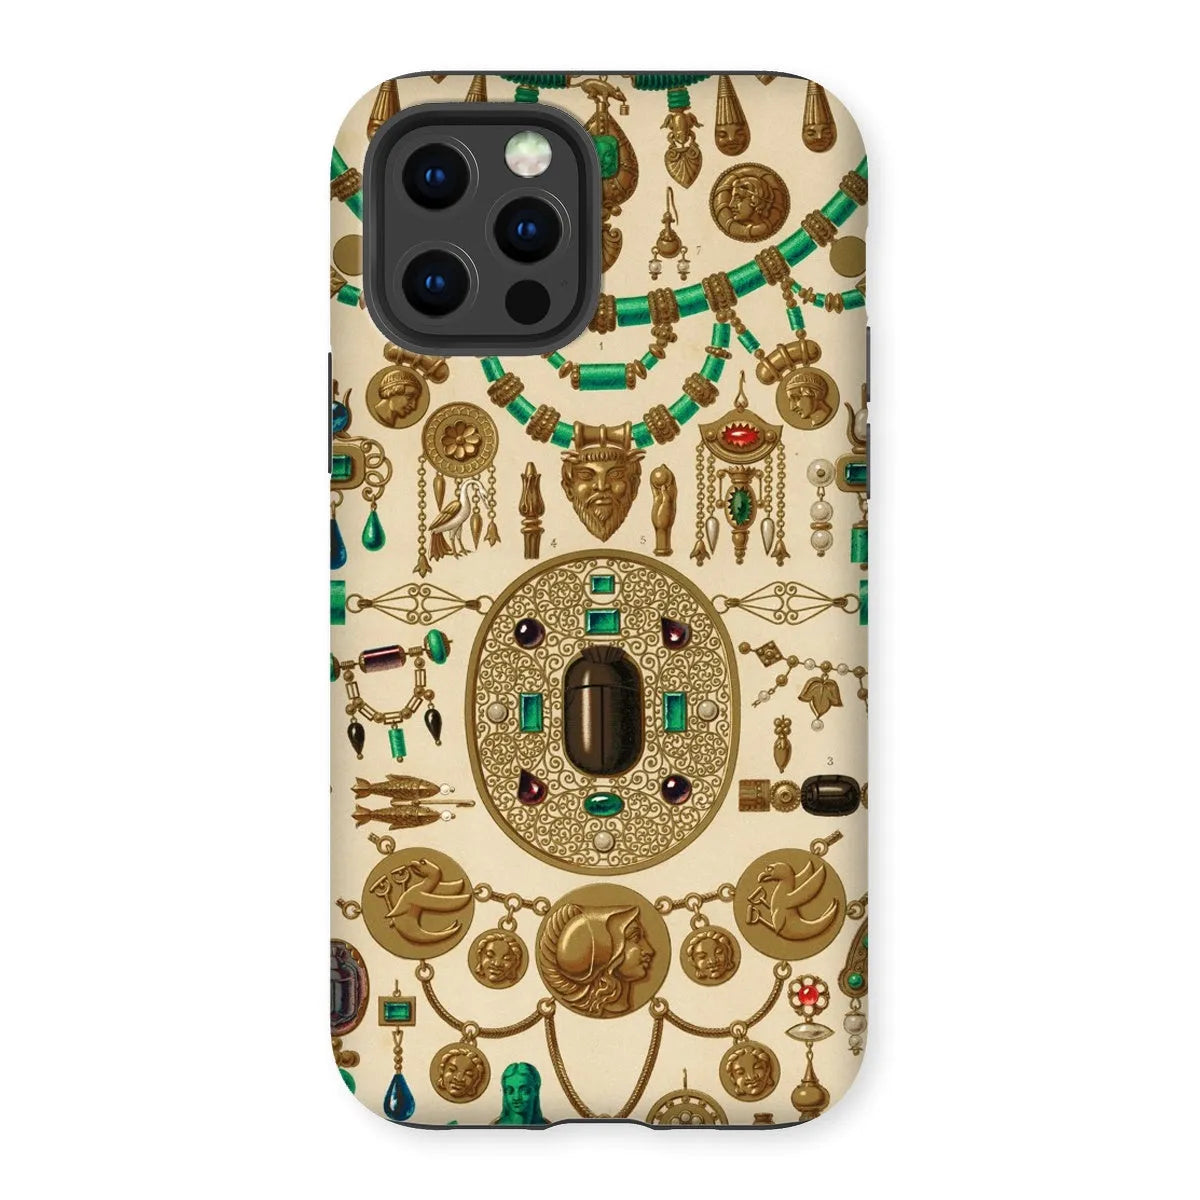 Etruscan Jewelry By Auguste Racinet Art Phone Case - Iphone 12 Pro / Matte - Mobile Phone Cases - Aesthetic Art